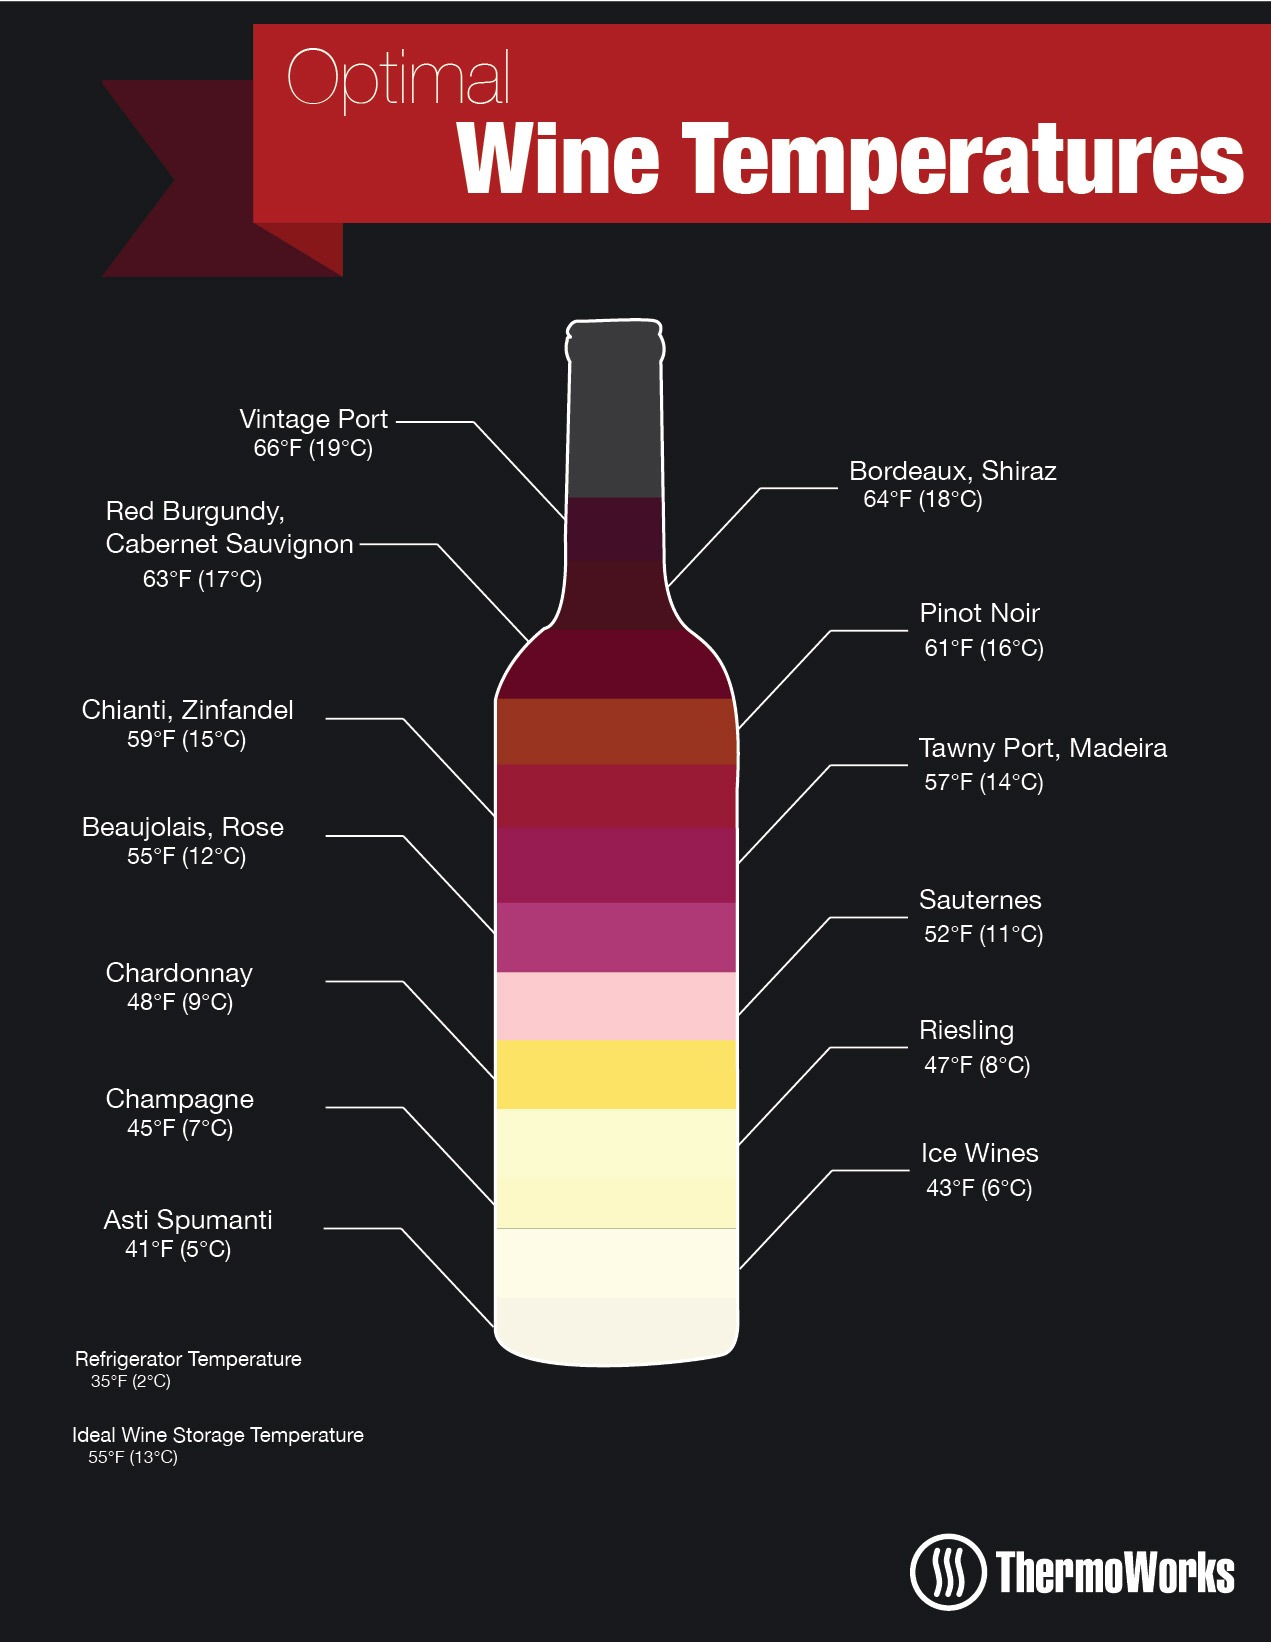 Temperatures of wine service and storage